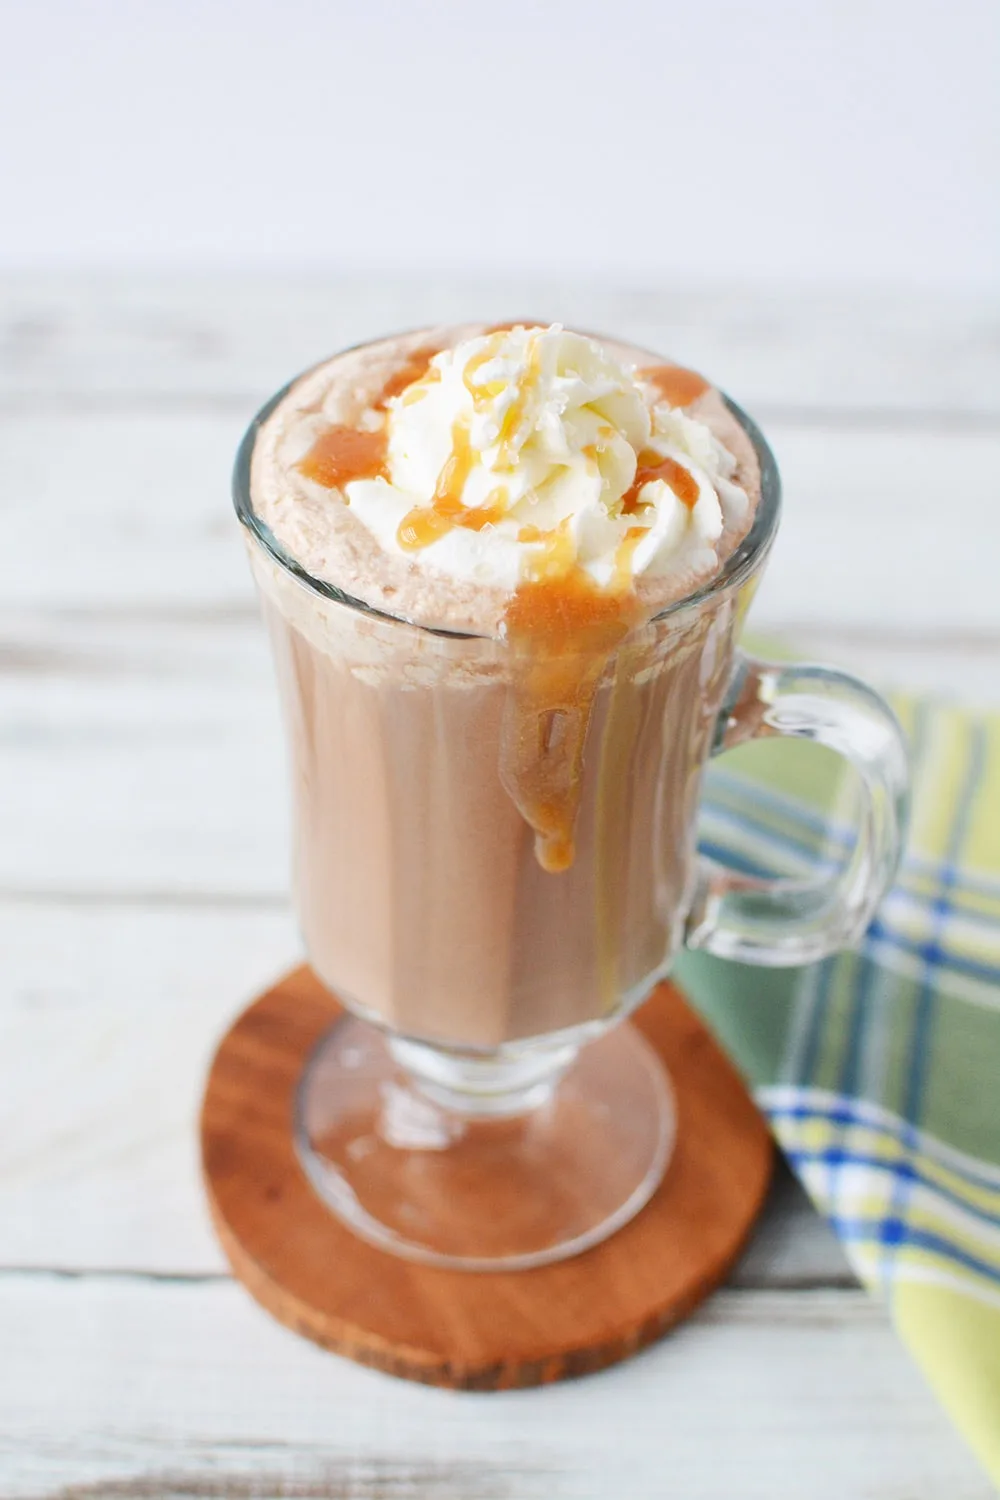 Coffee drink topped with whipped cream and caramel in a glass mug.